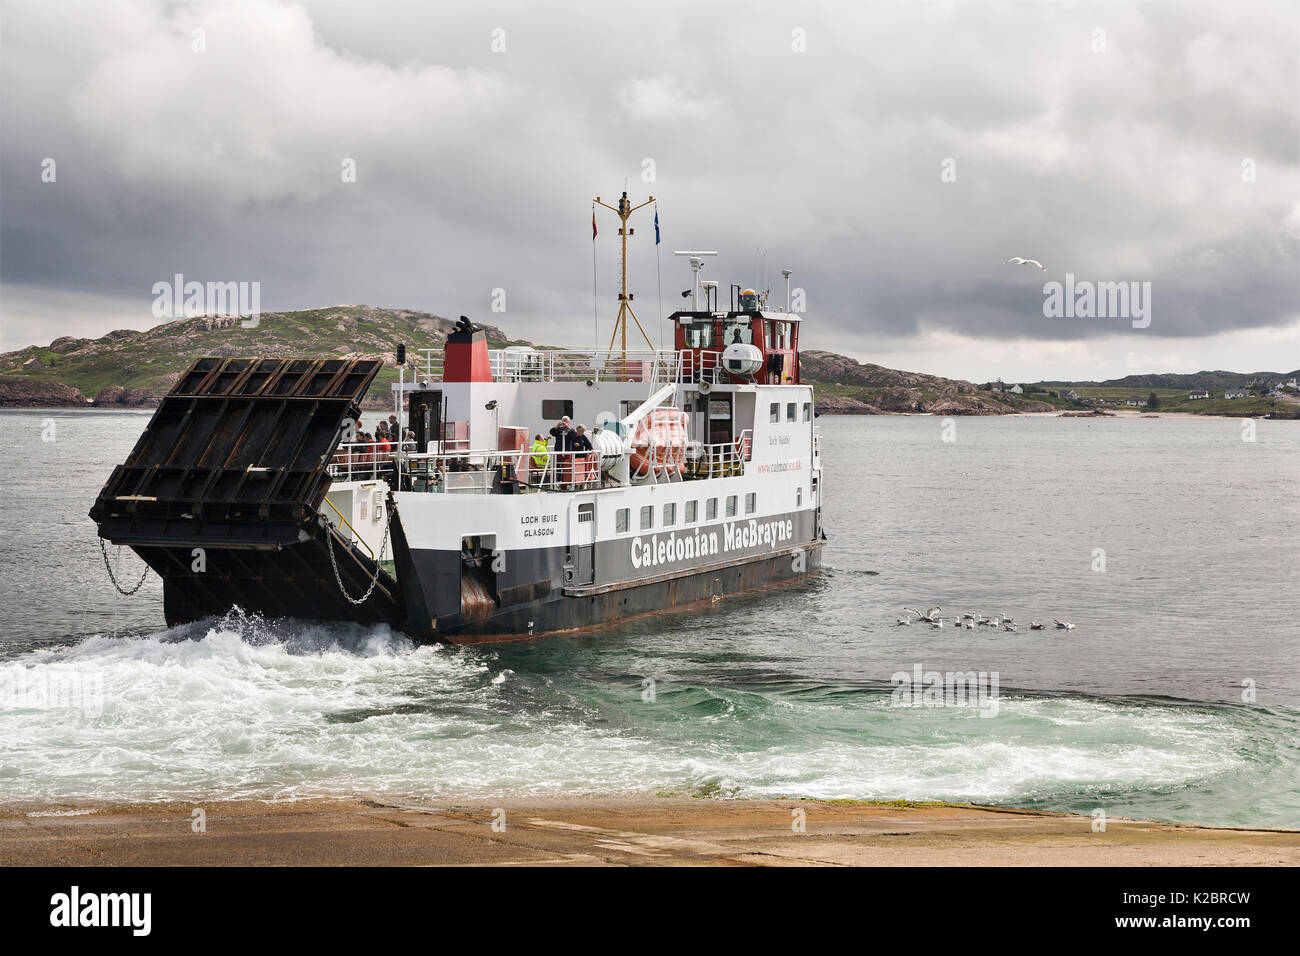 The Iona ferry 'Loch Buie' leaving Iona for Fionnphort on Mull, Scotland, UK. All non-editorial uses must be cleared individually. Stock Photo